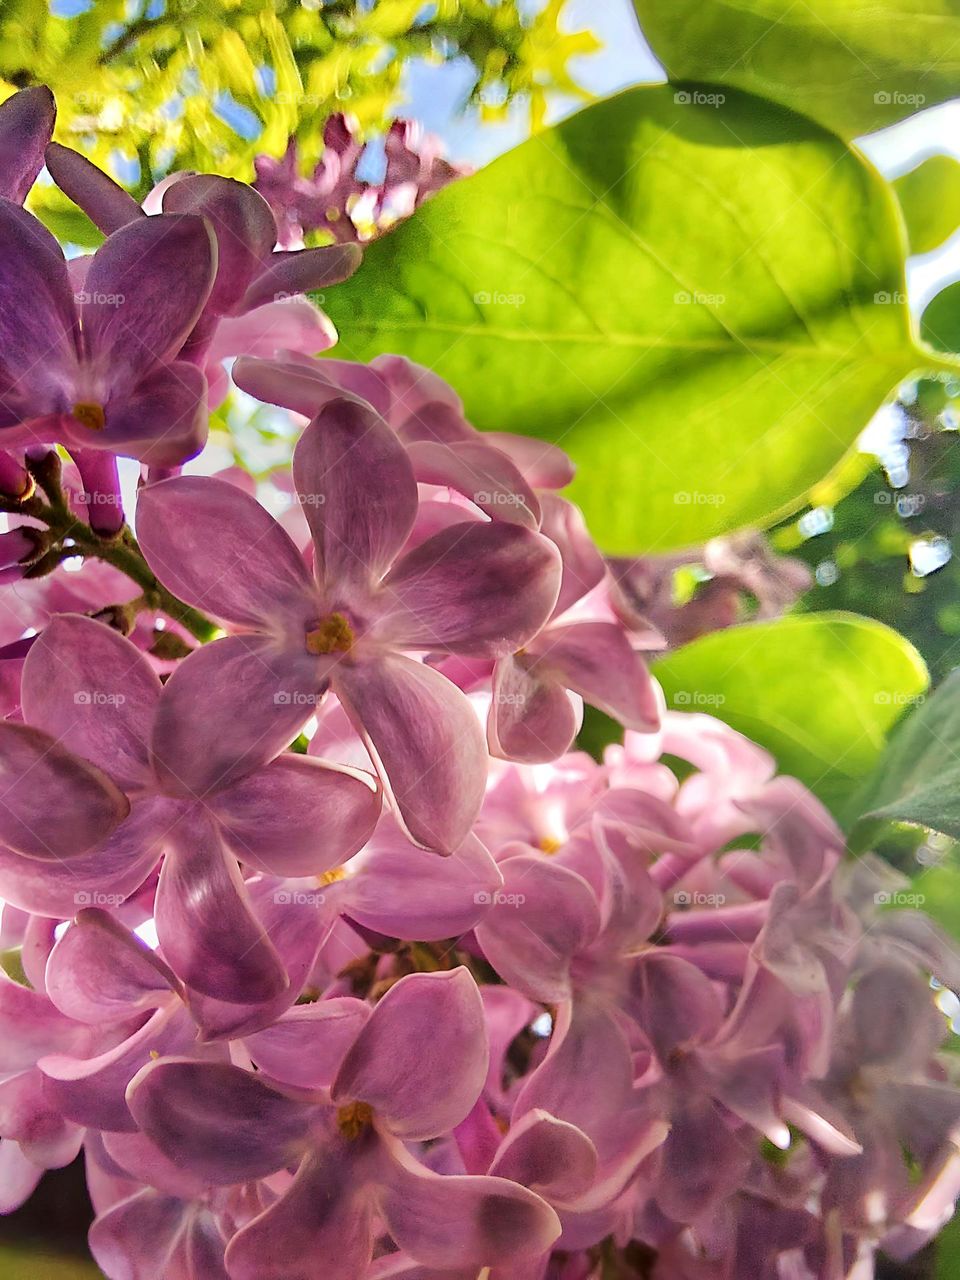 THE LILAC OF OUR HOUSE